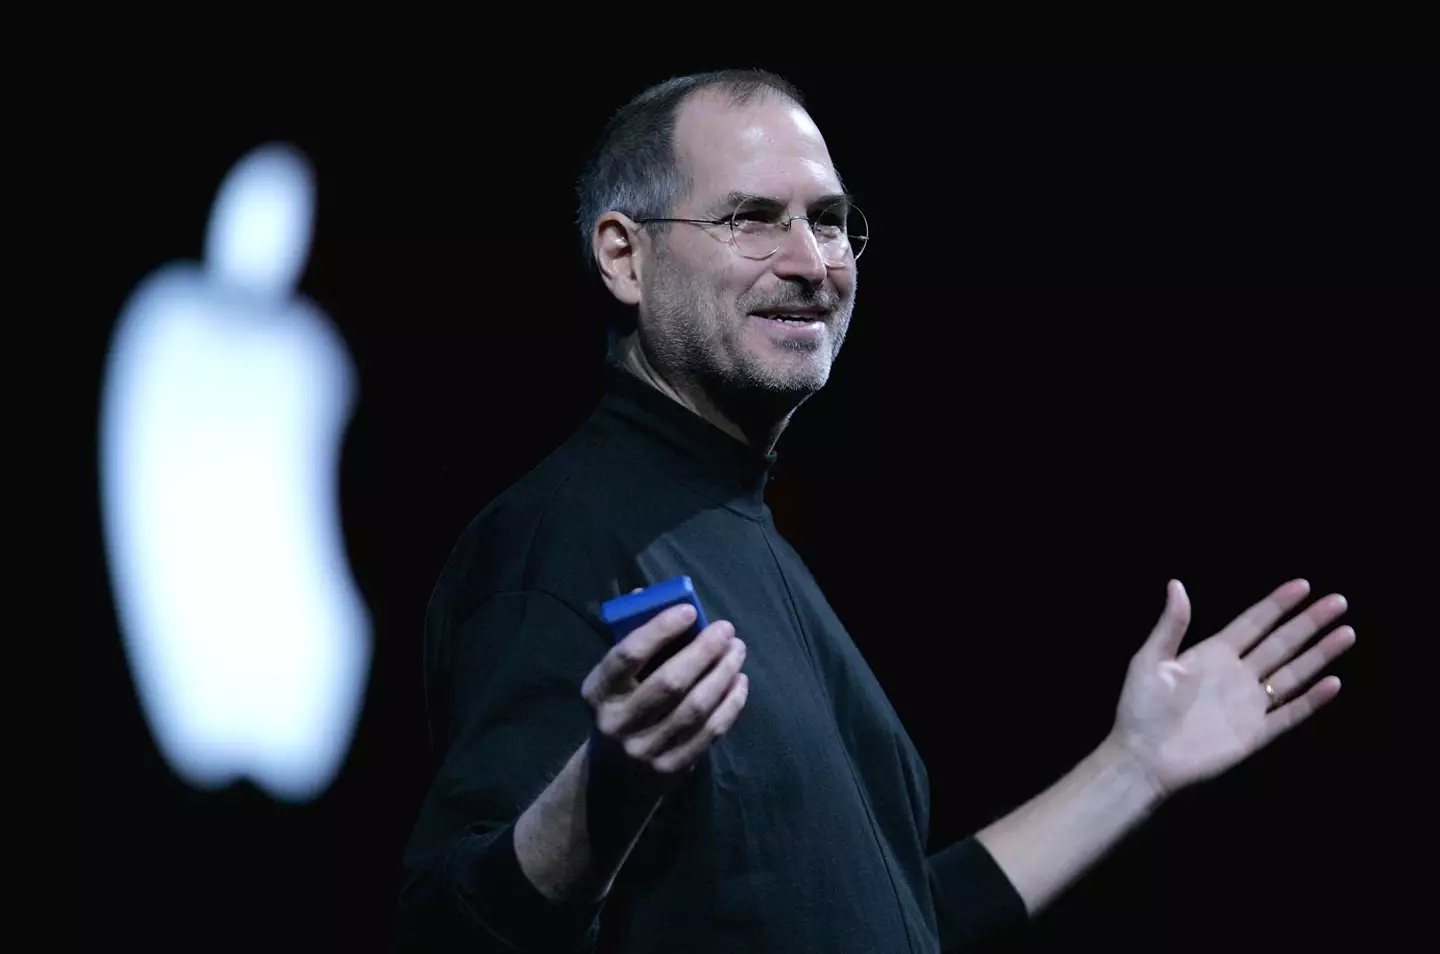 Jobs unveiled the first iPhone back in 2007.